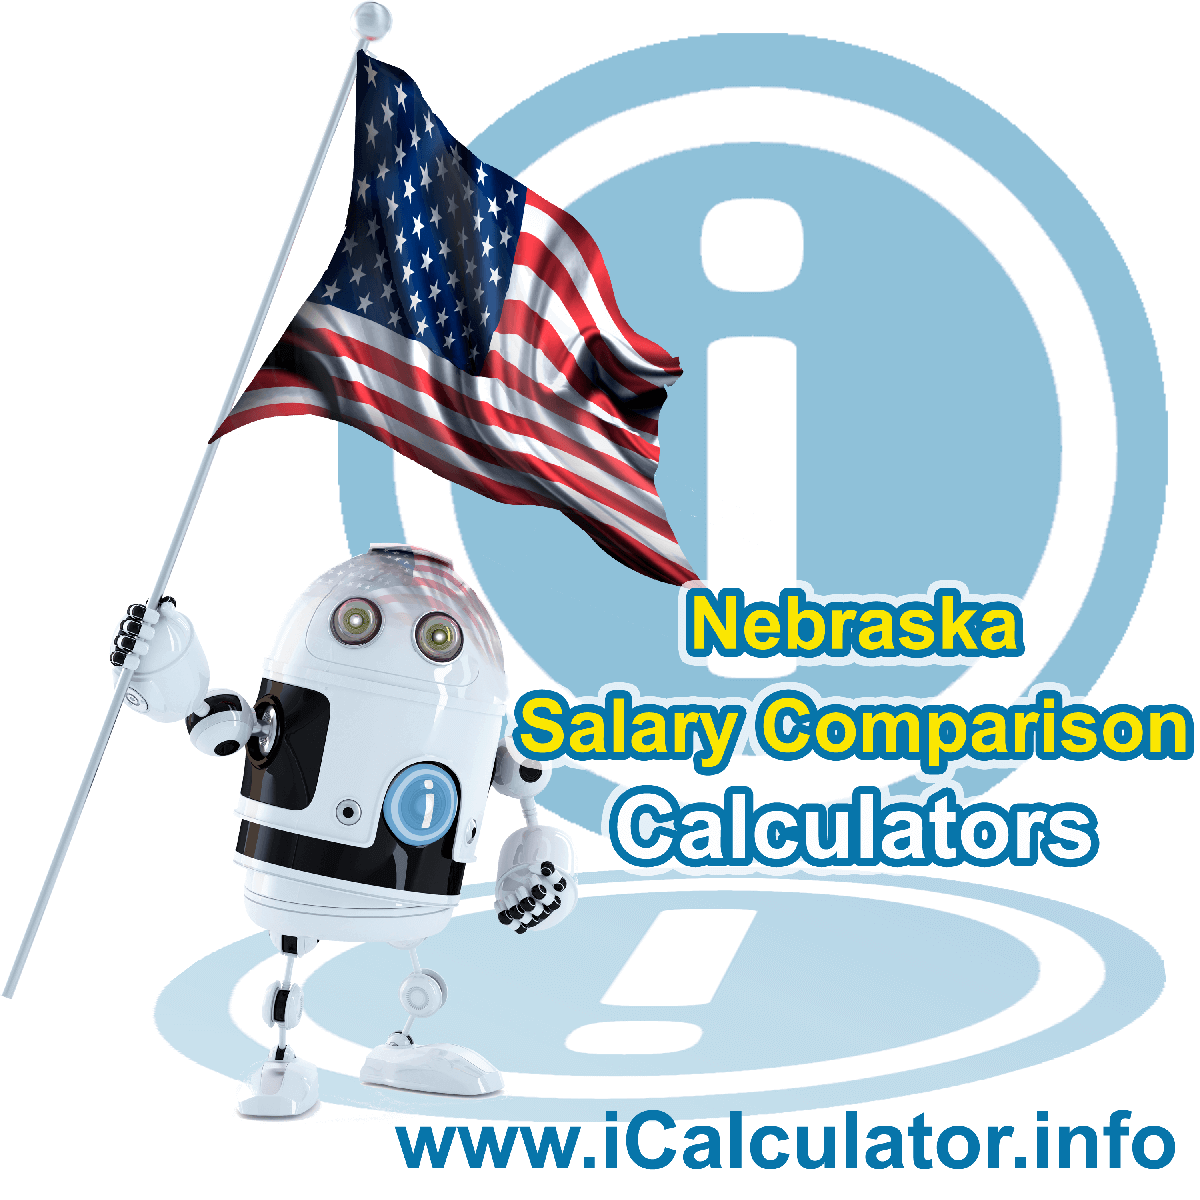 Nebraska Salary Comparison Calculator 2022 | iCalculator™ | The Nebraska Salary Comparison Calculator allows you to quickly calculate and compare upto 6 salaries in Nebraska or compare with other states for the 2022 tax year and historical tax years. 